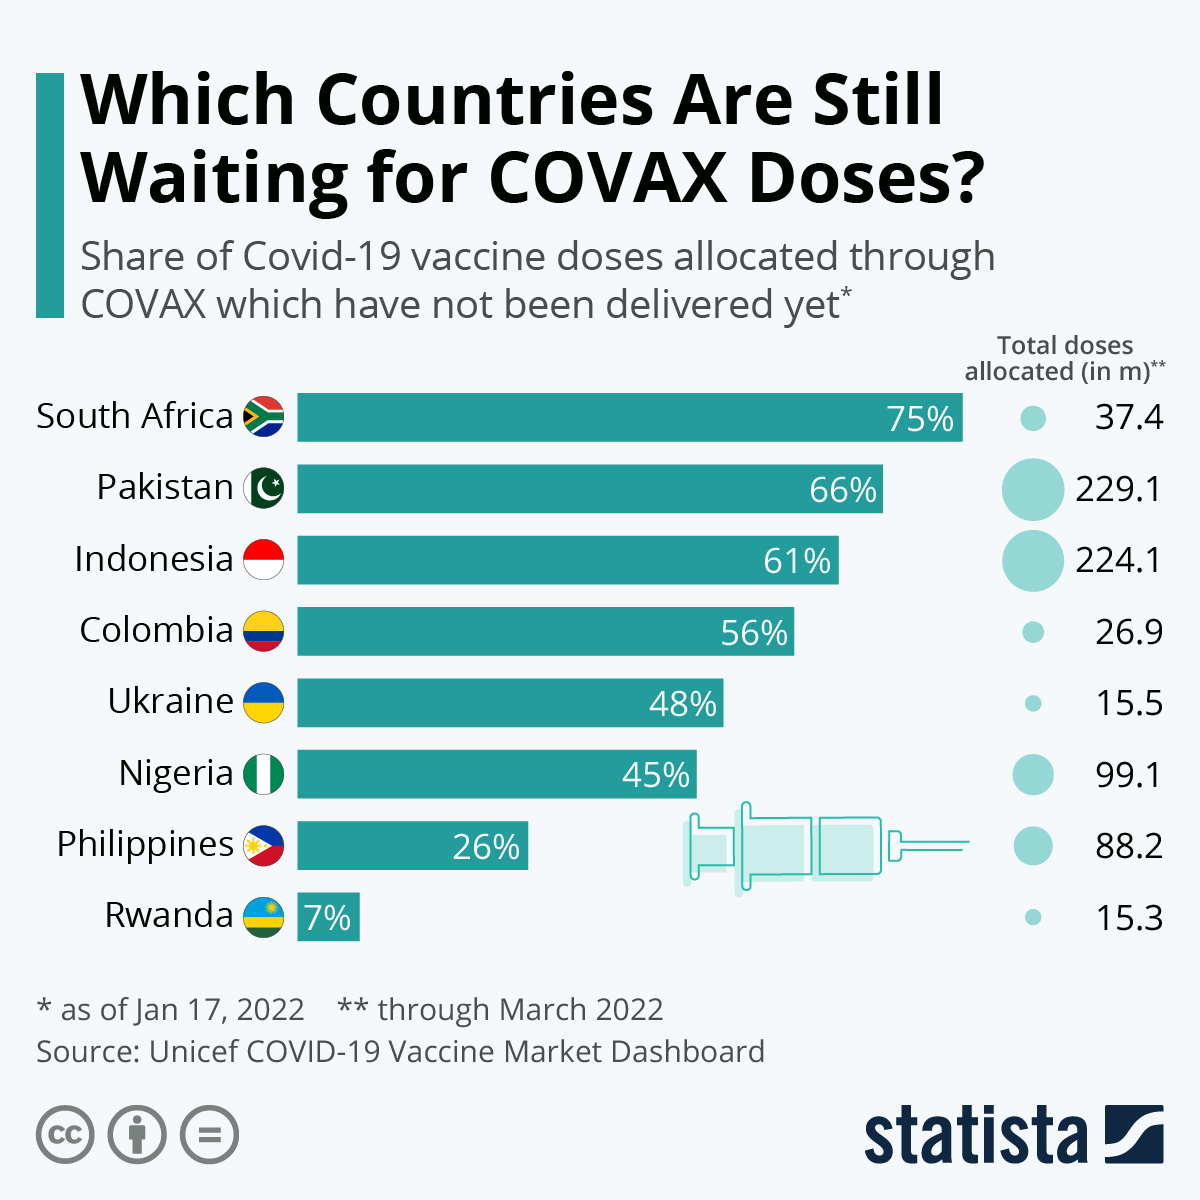 Which Countries Are Still Waiting for COVAX Doses?